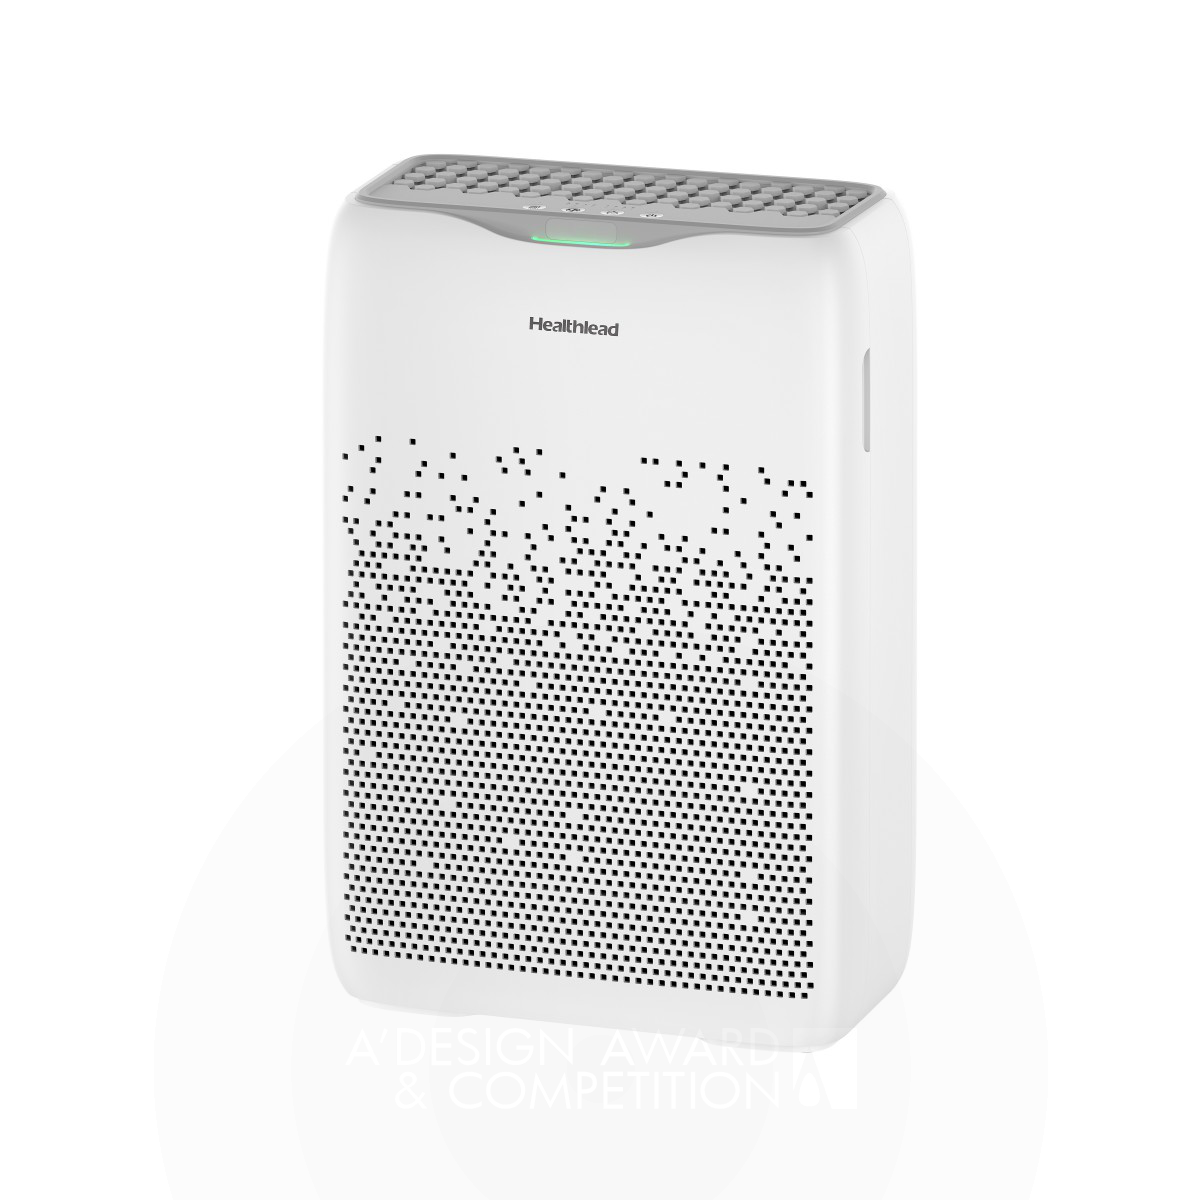 Compact Air Purifier by Xu Chen and Rong Zhang Silver Heating, Ventilation, and Air Conditioning Products Design Award Winner 2021 